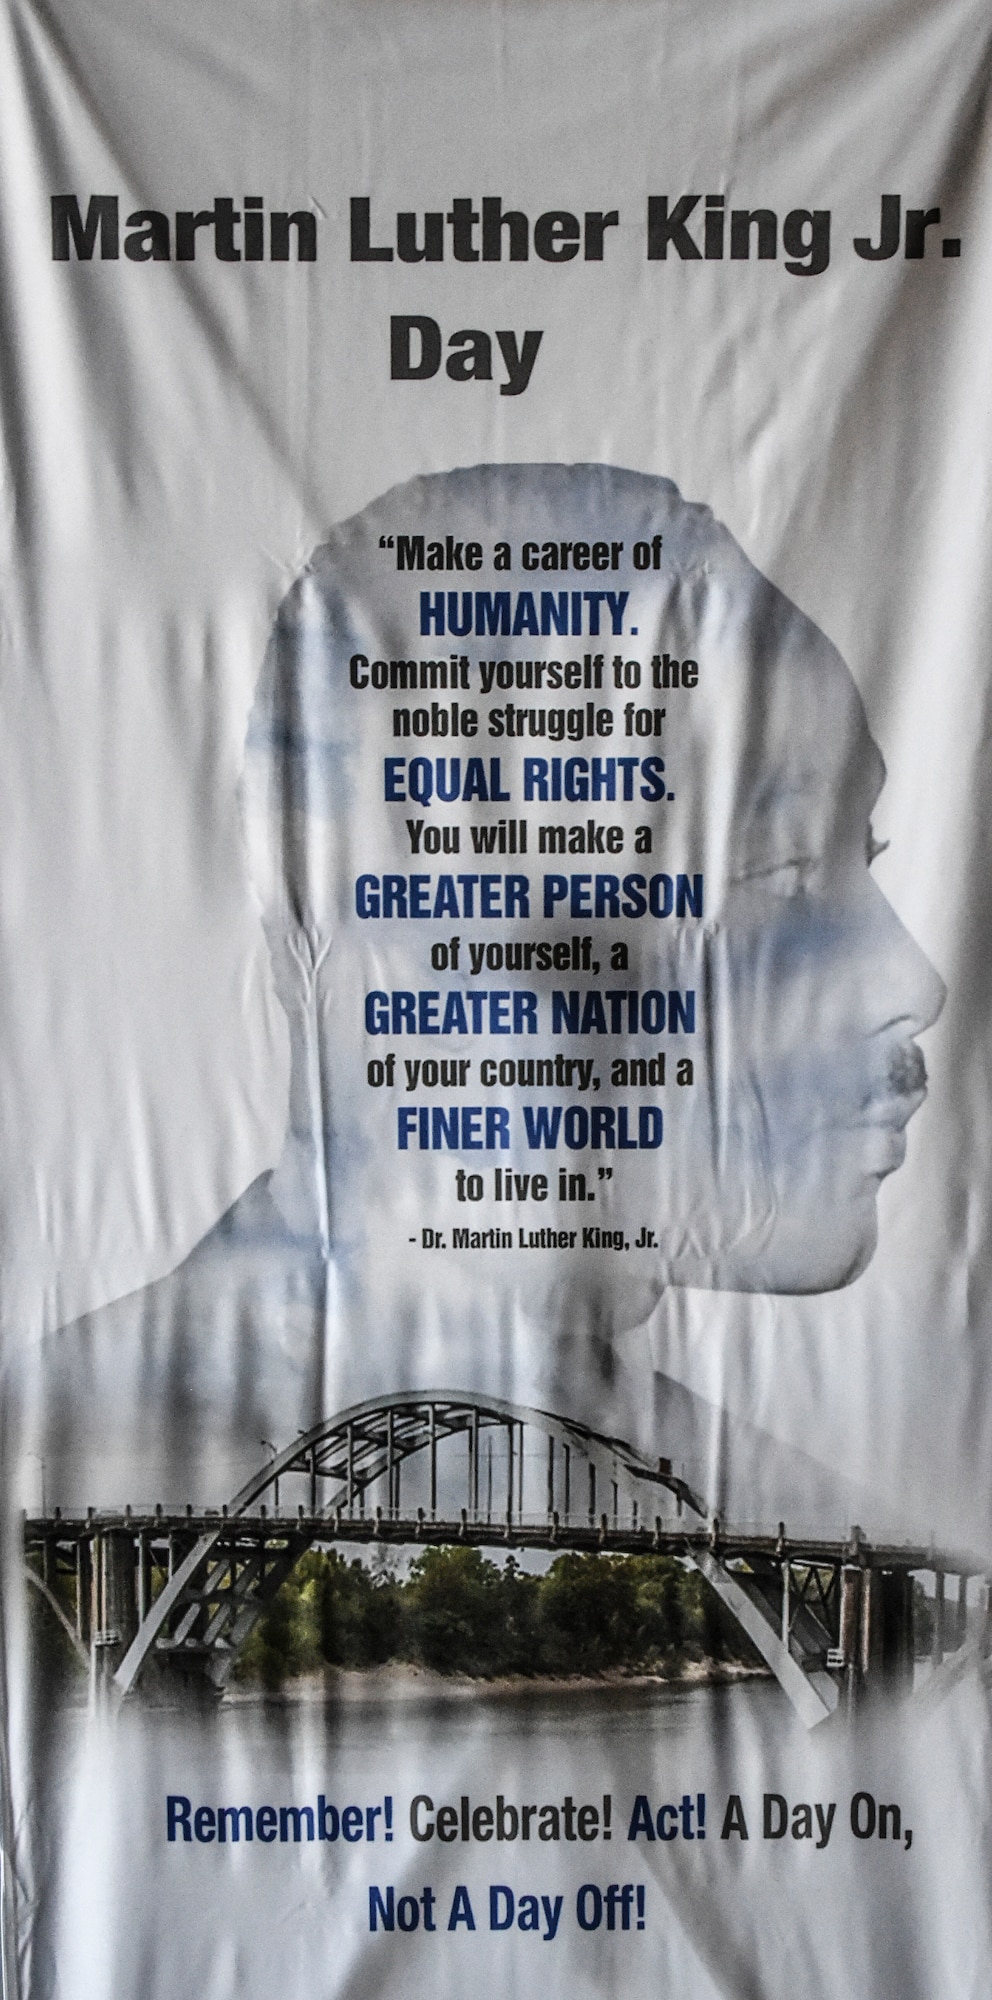 A cloth poster of Dr. Martin Luther King Jr.